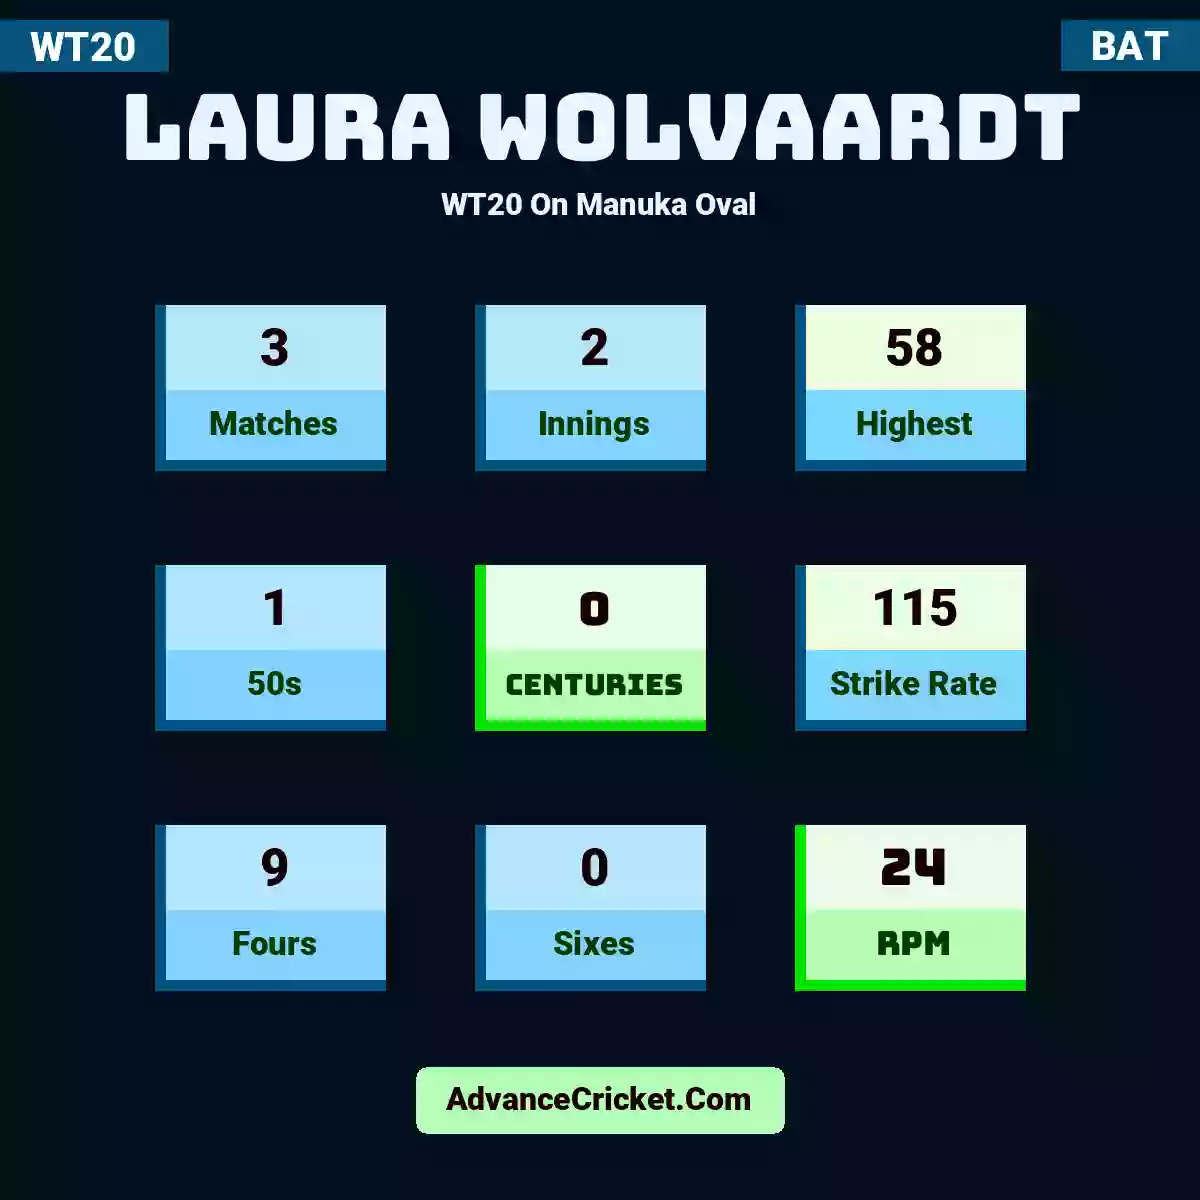 Laura Wolvaardt WT20  On Manuka Oval, Laura Wolvaardt played 3 matches, scored 58 runs as highest, 1 half-centuries, and 0 centuries, with a strike rate of 115. L.Wolvaardt hit 9 fours and 0 sixes, with an RPM of 24.